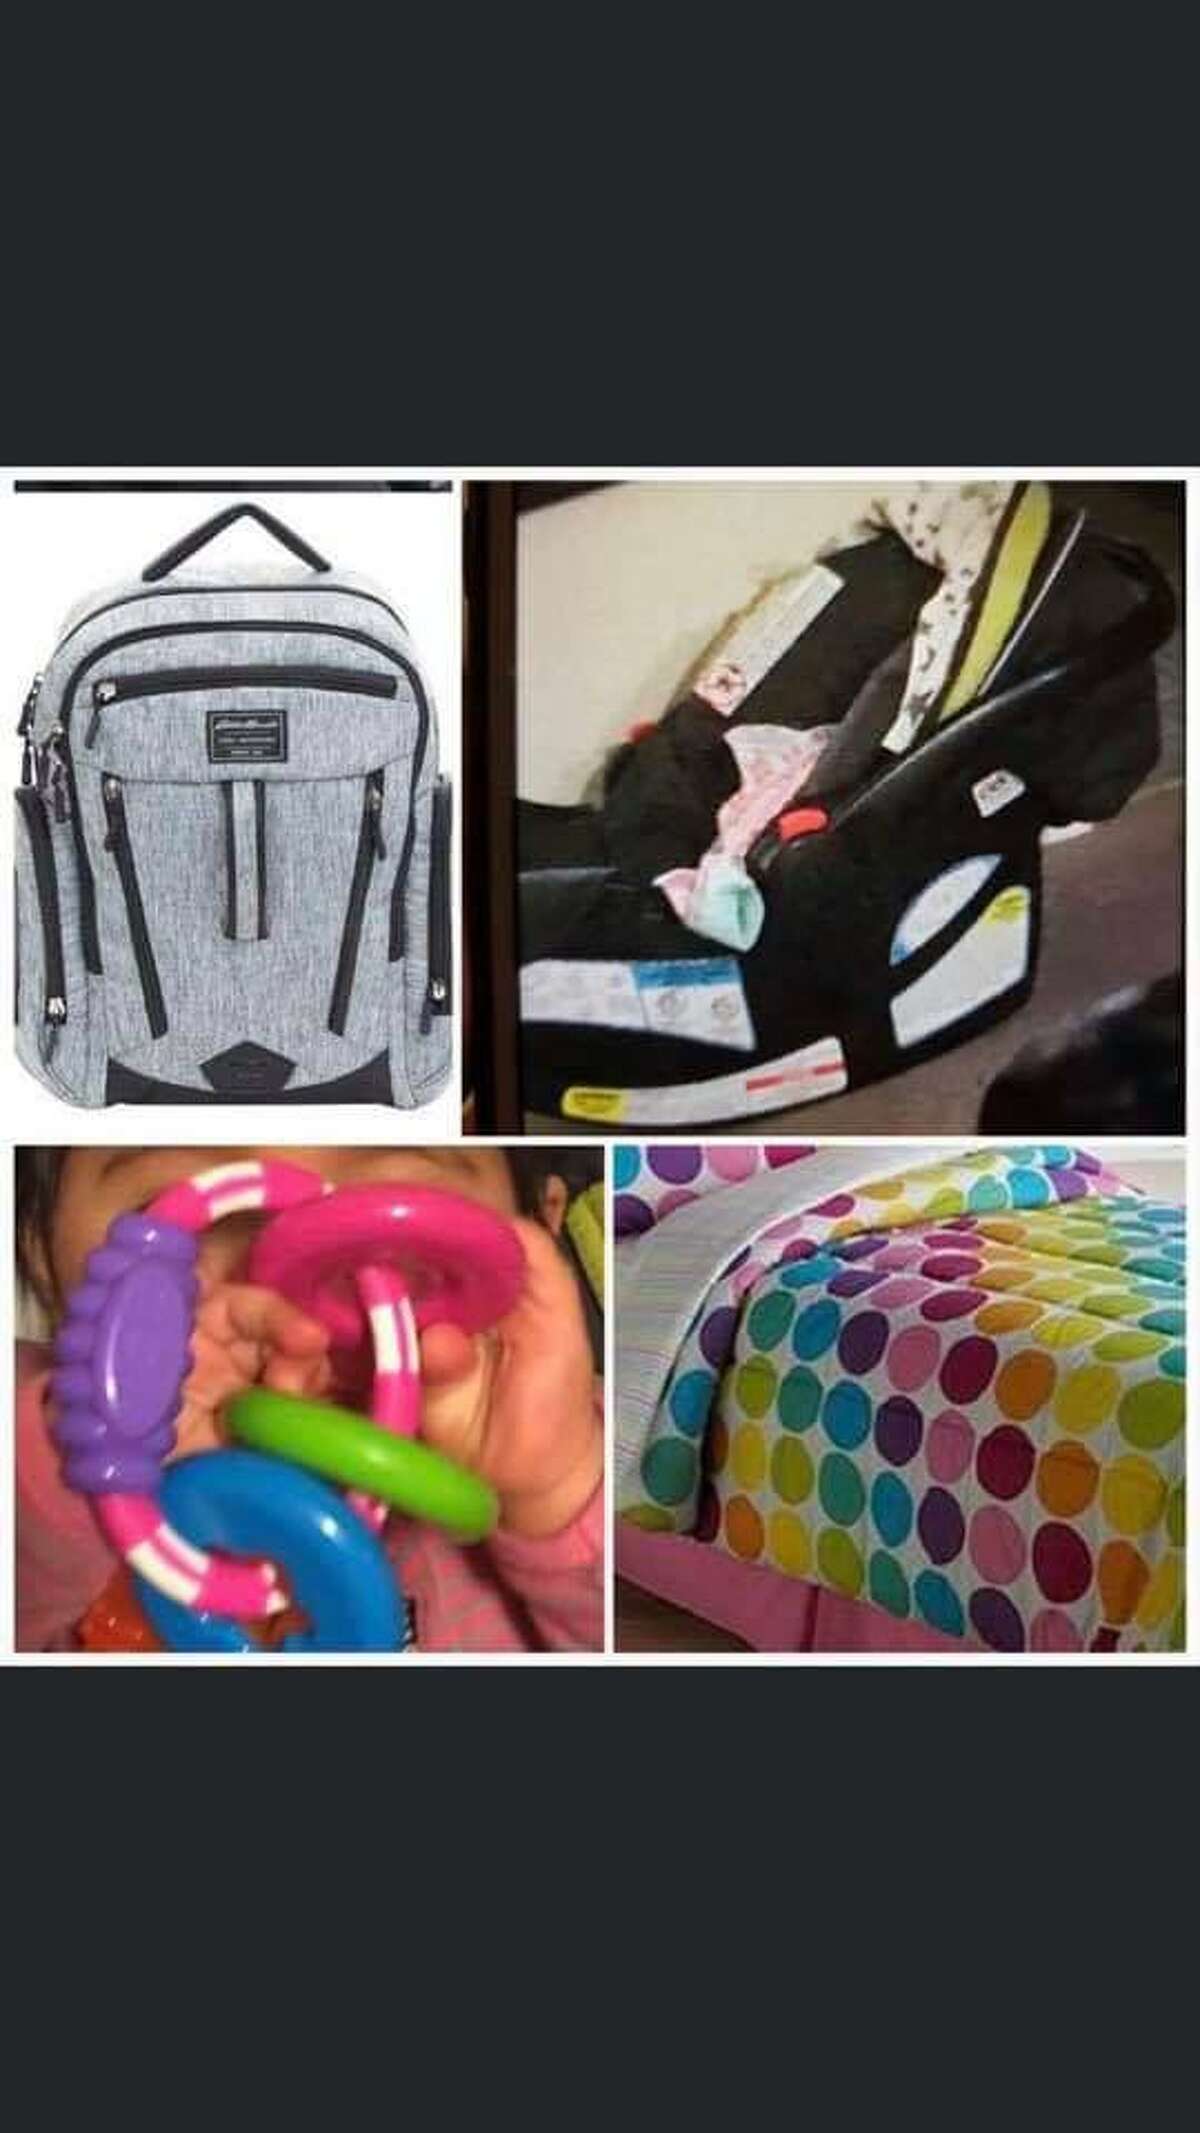 The Eddie Bauer diaper bag, the Graco car seat, the teething ring and the polka dot blanket are items the Ansonia Police believe could lead them to the whereabouts of Vanessa Morales. Anyone finding these items is urged to call the police at 203-735-1885..